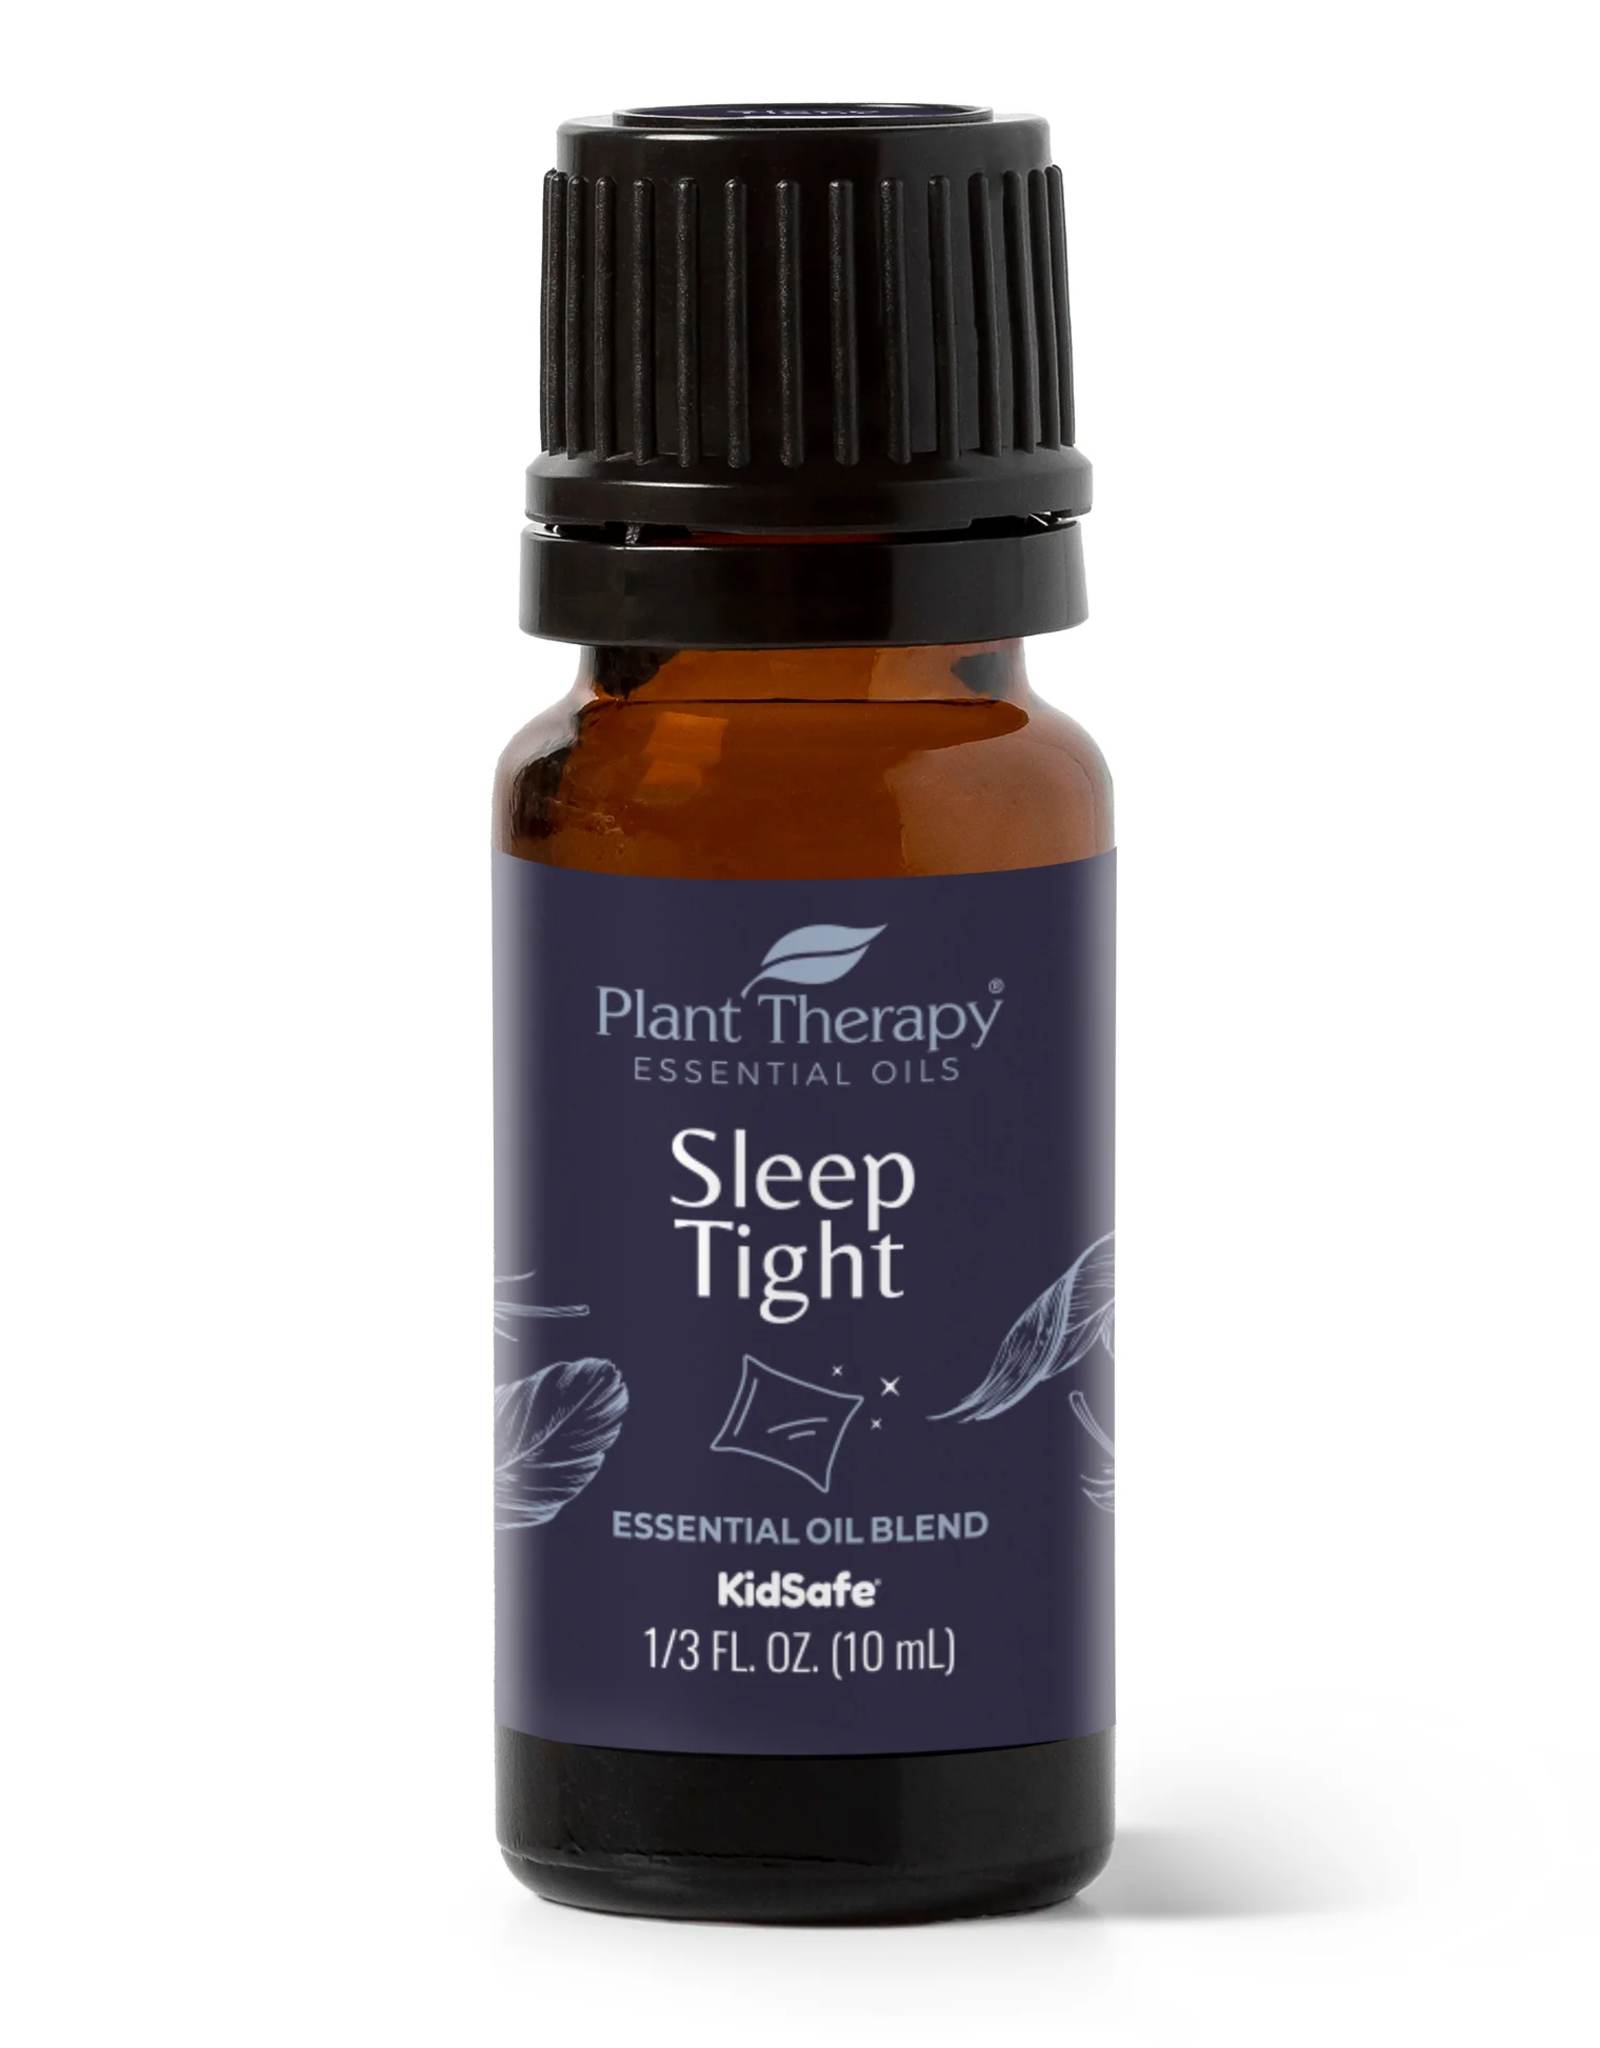 Plant Therapy Sleep Tight Essential Oil Blend 10ml